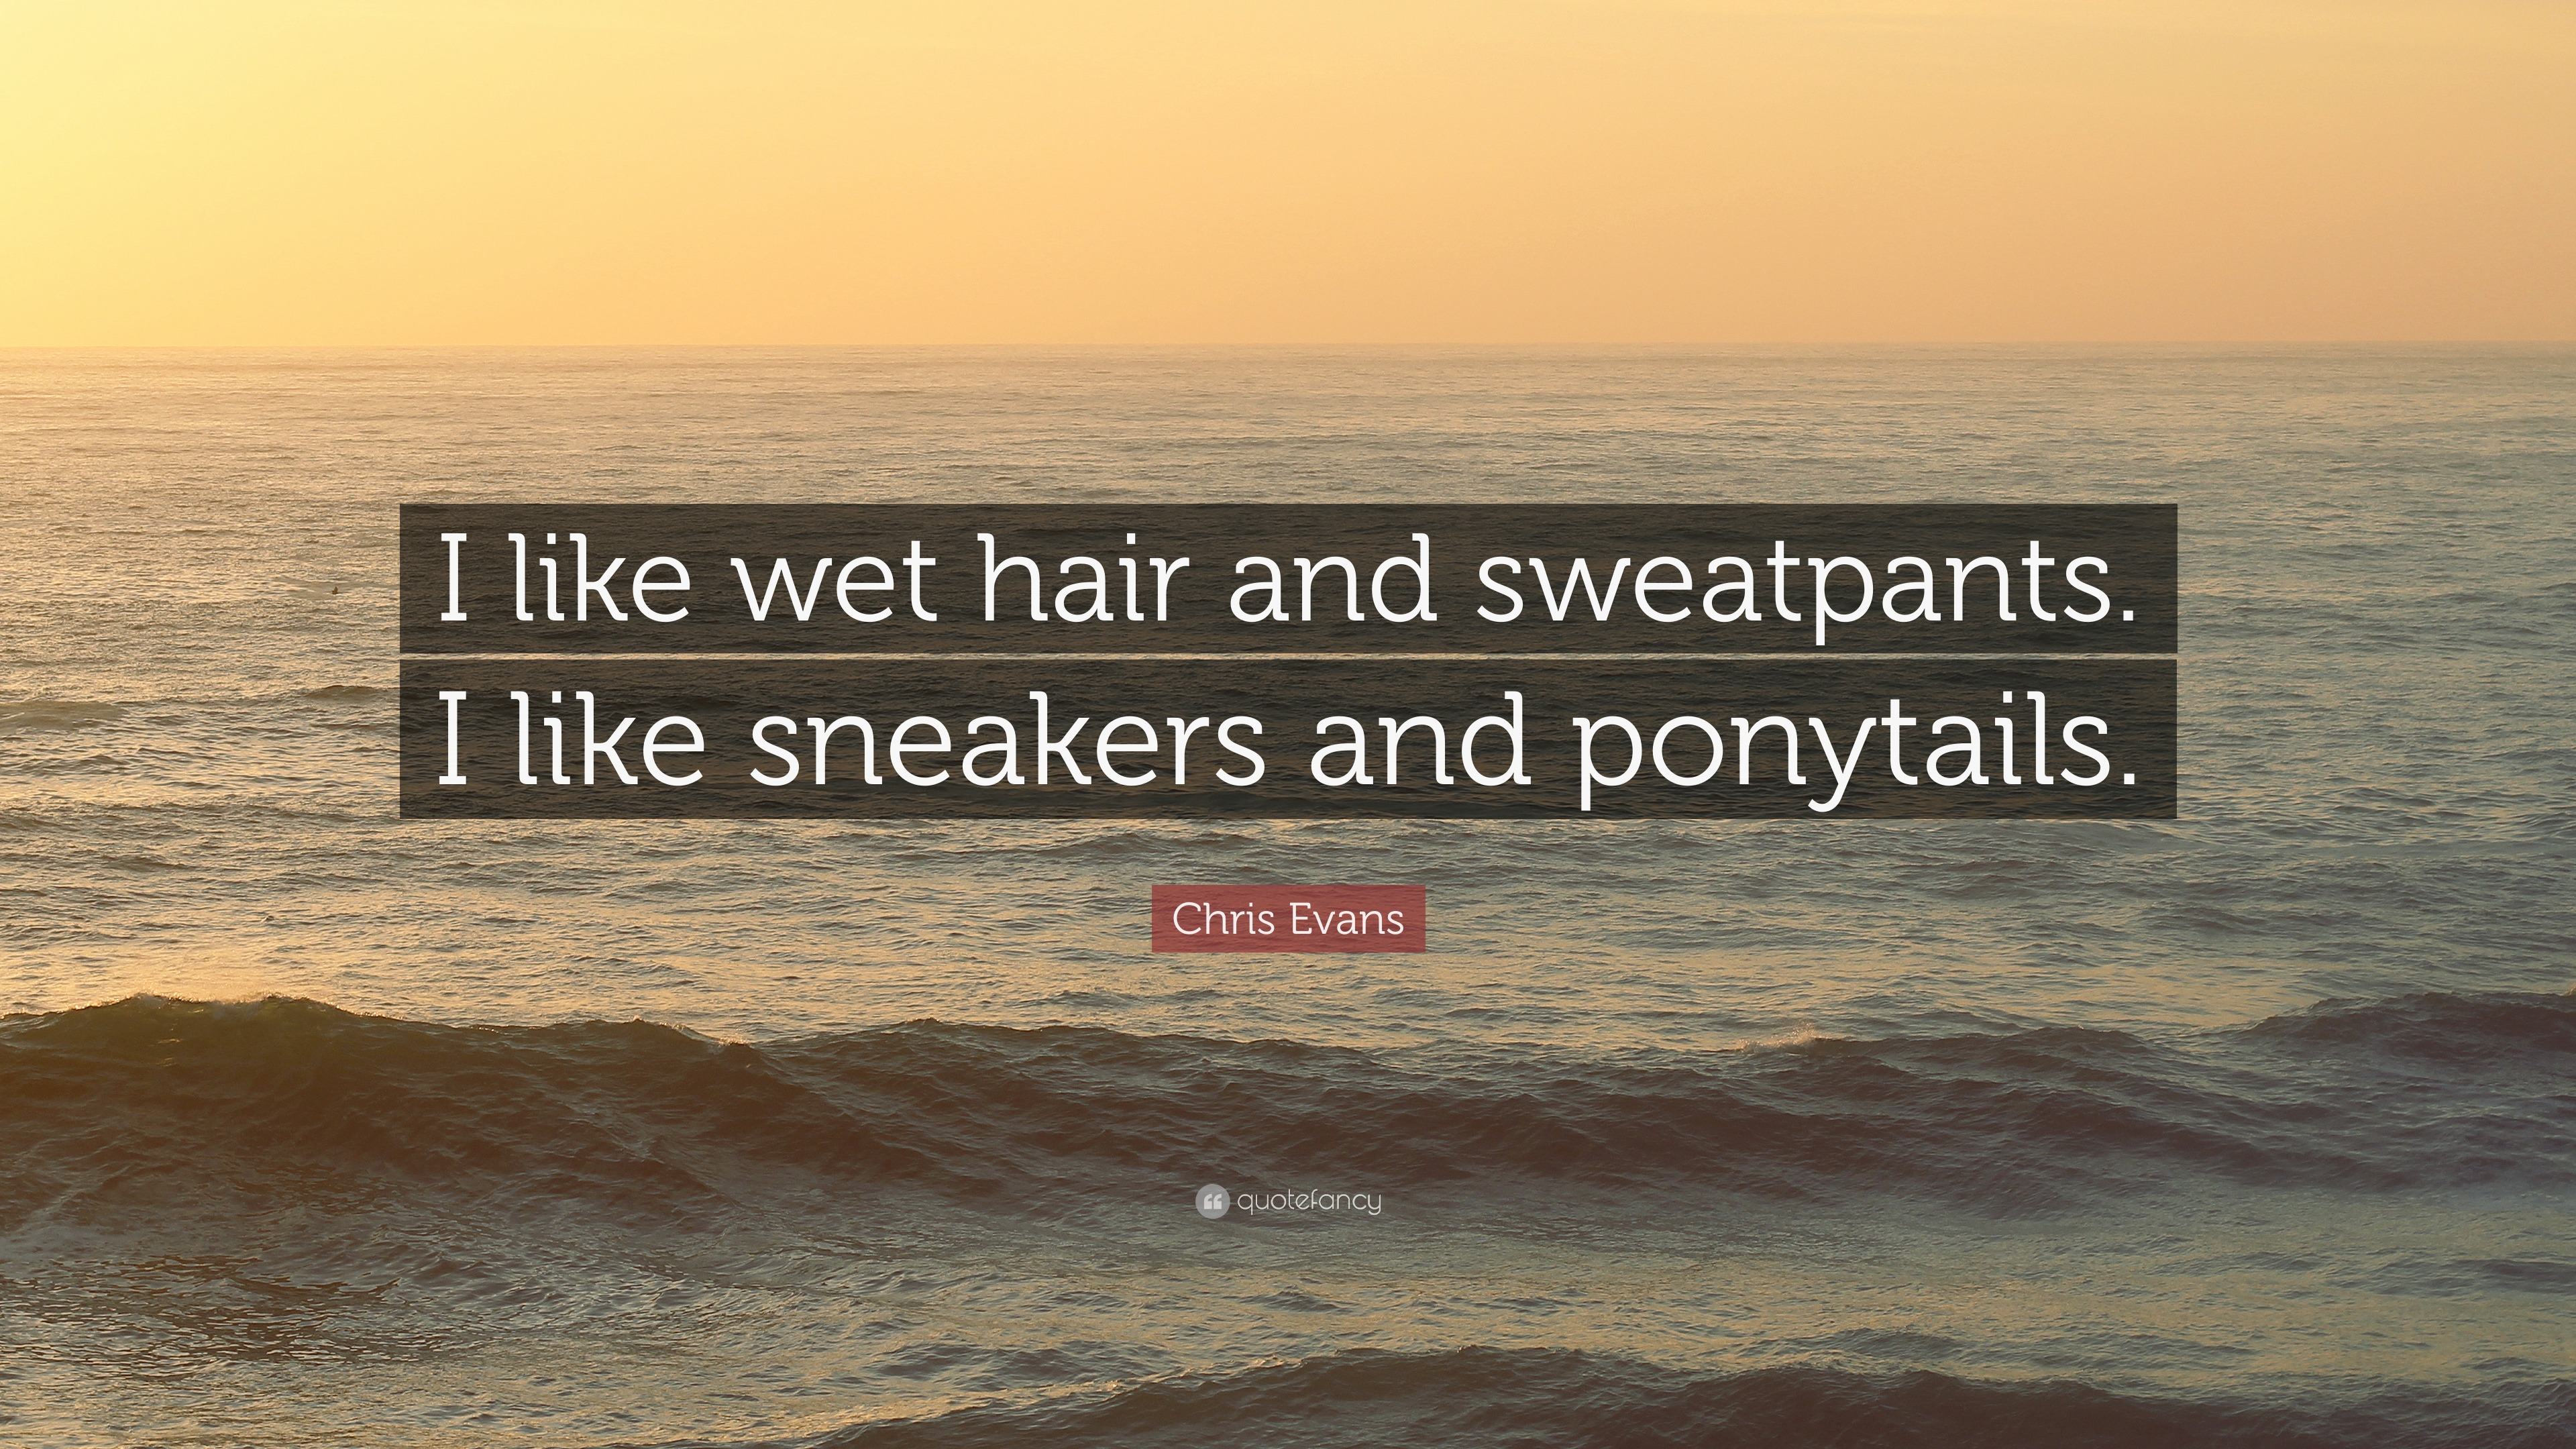 Chris Evans Quote: “I like wet hair and sweatpants. I like sneakers and  ponytails.”